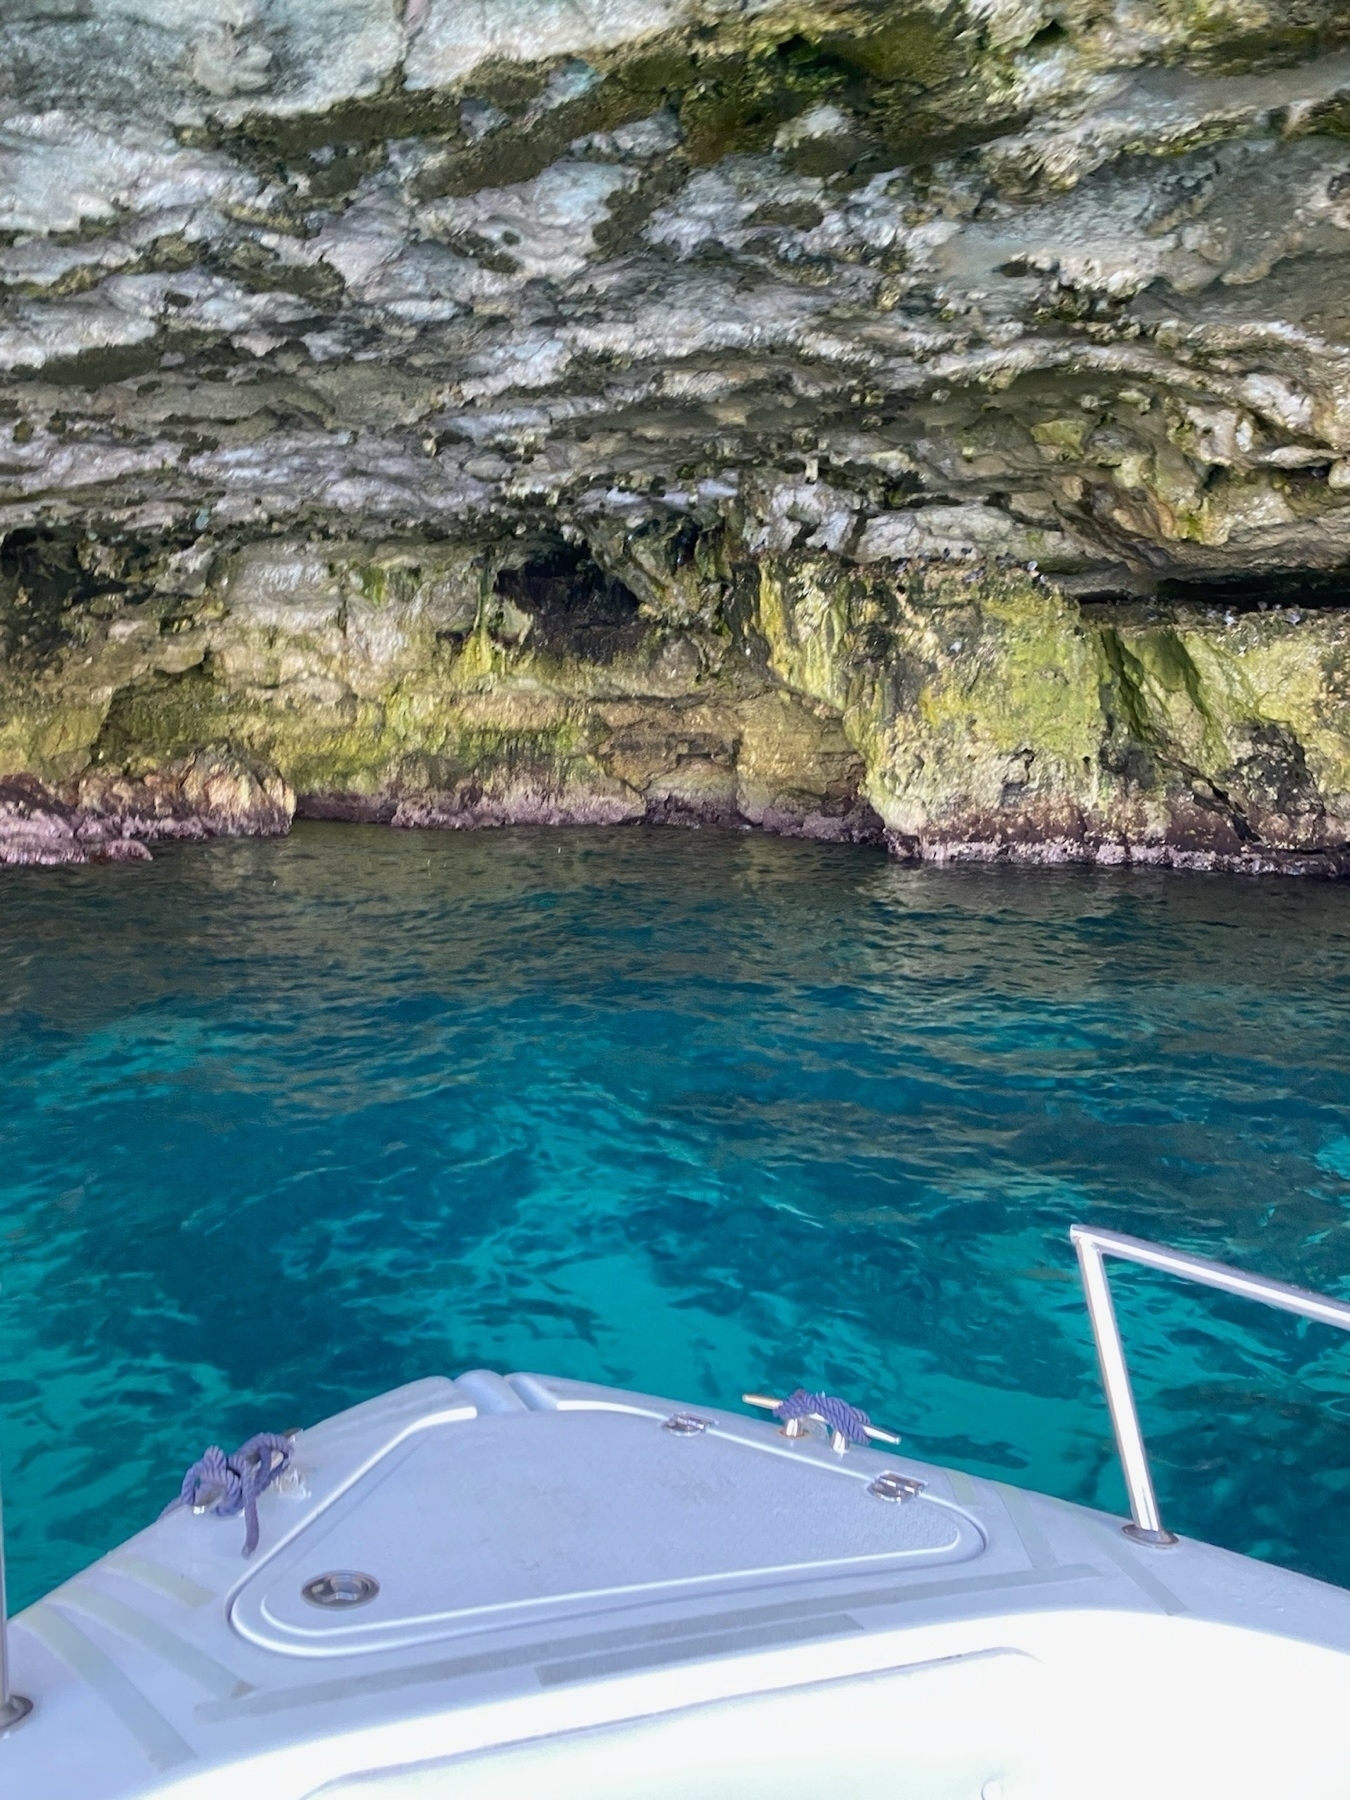 A boat is partially visible as it enters a rocky cave with a low ceiling. The water in the cave is a clear, vibrant blue and the cave walls are covered in green moss and algae.